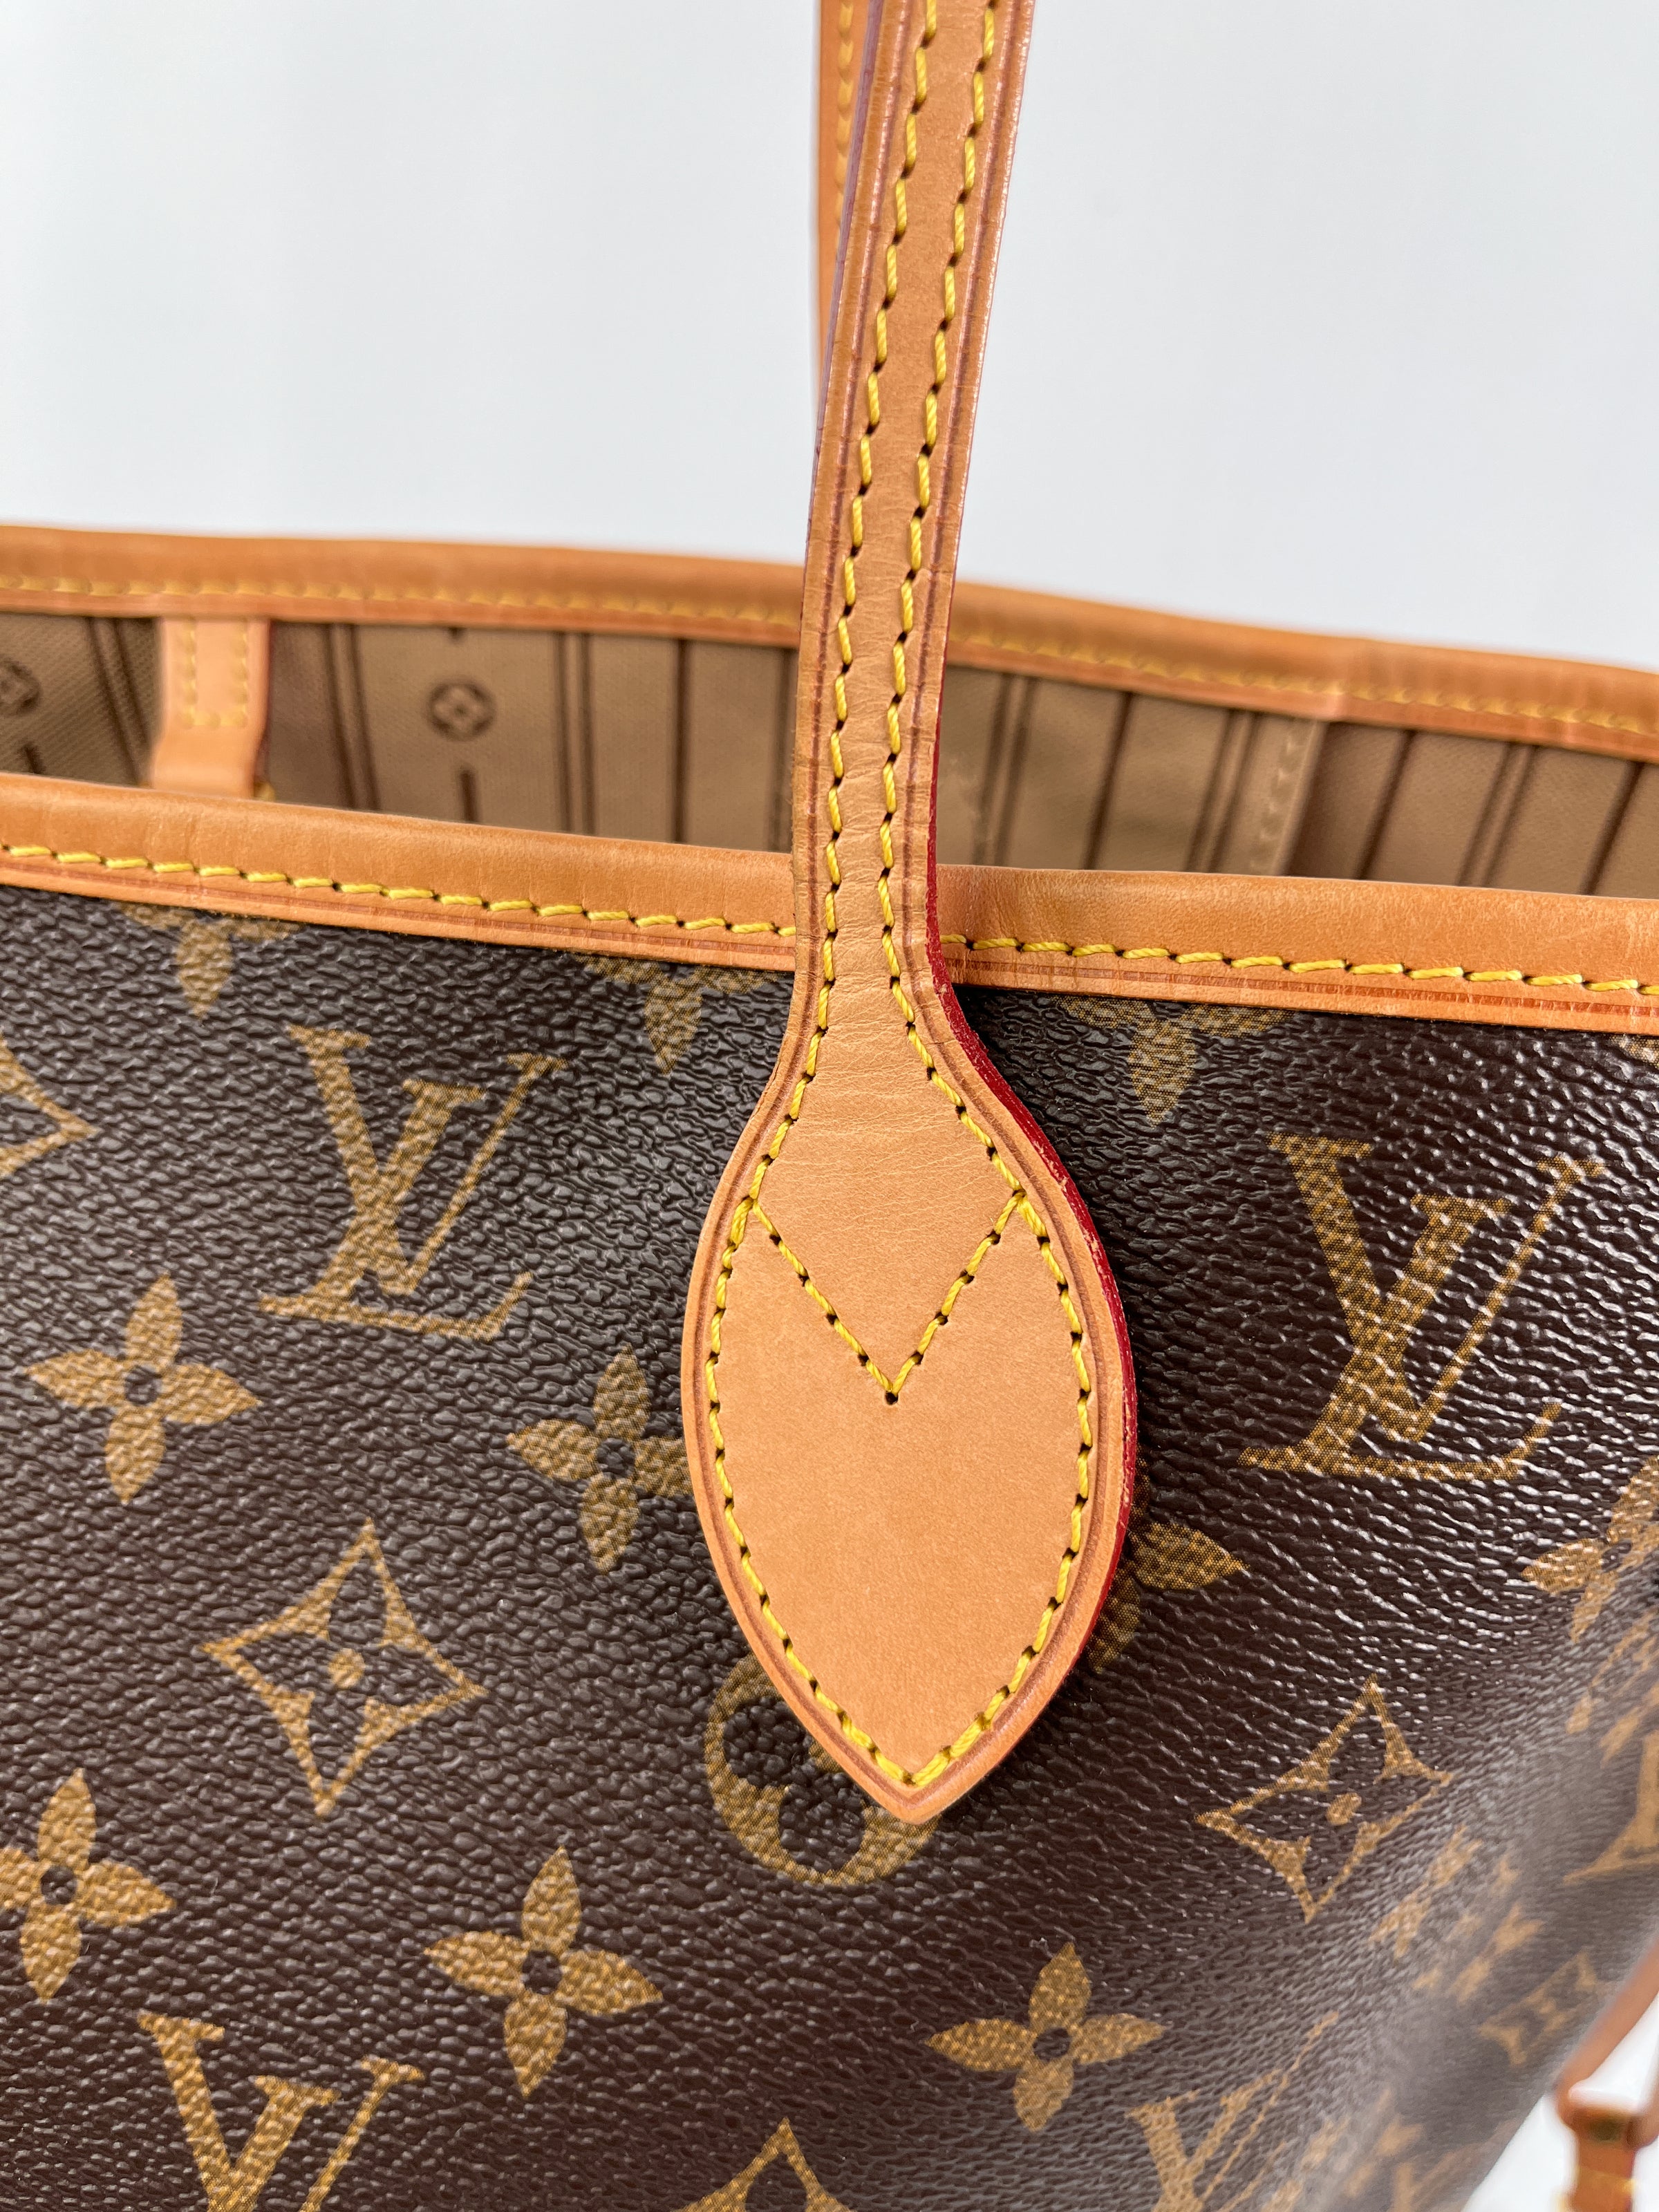 This Louis Vuitton Monogram Tote Comes With Holes Burned Into It  Costs  11757 In Case You Have Cash To Burn  ZULAsg